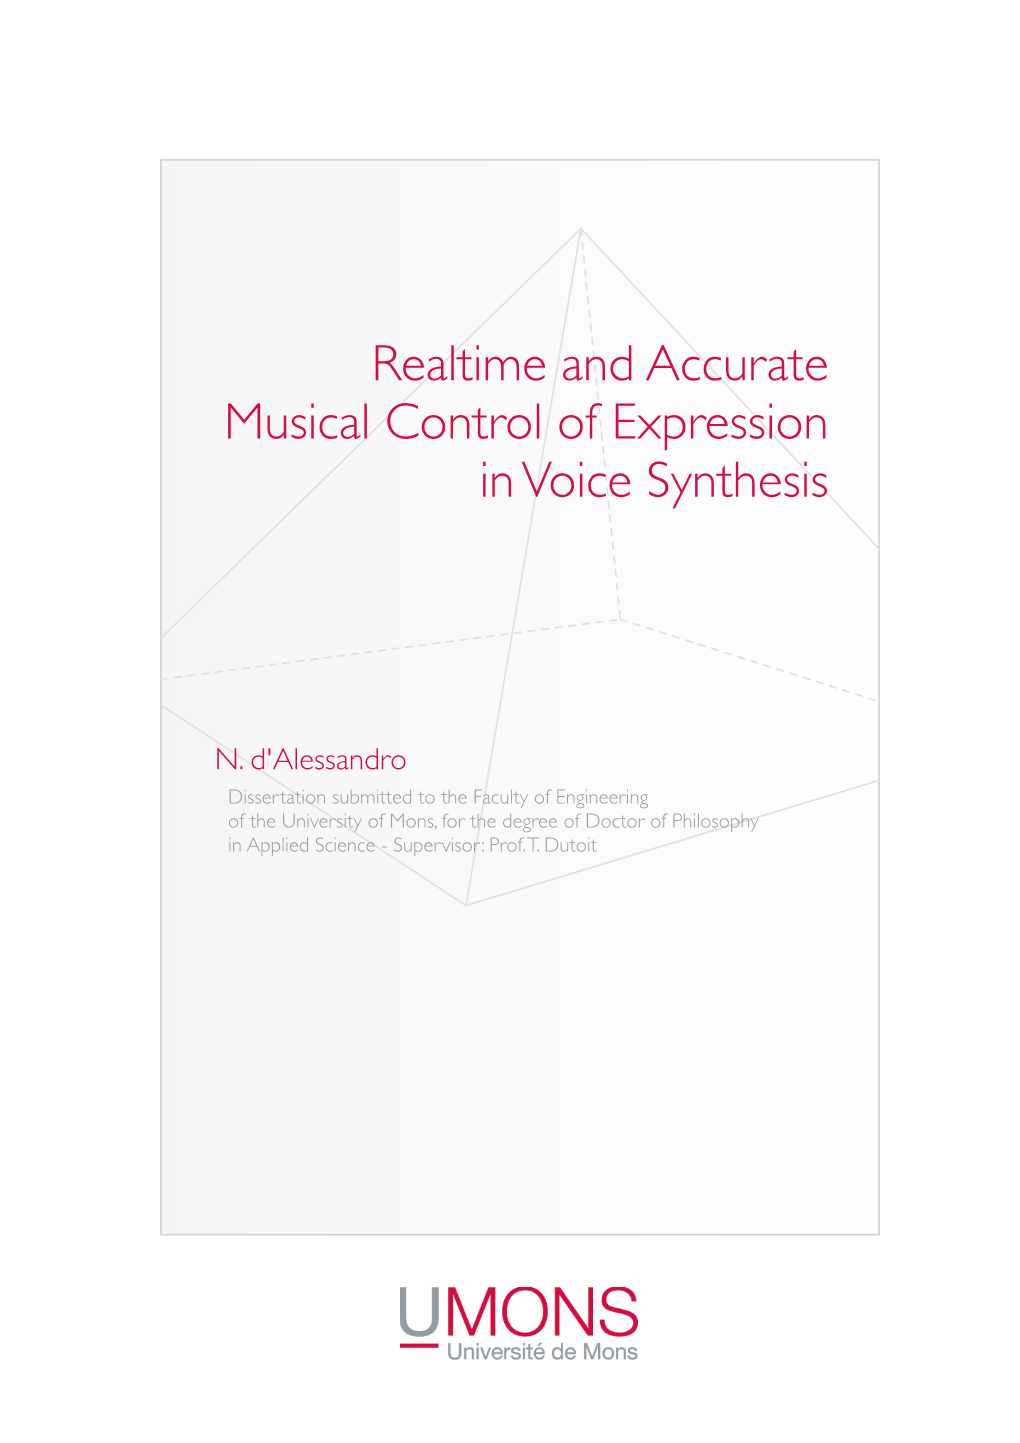 Realtime and Accurate Musical Control of Expression in Voice Synthesis